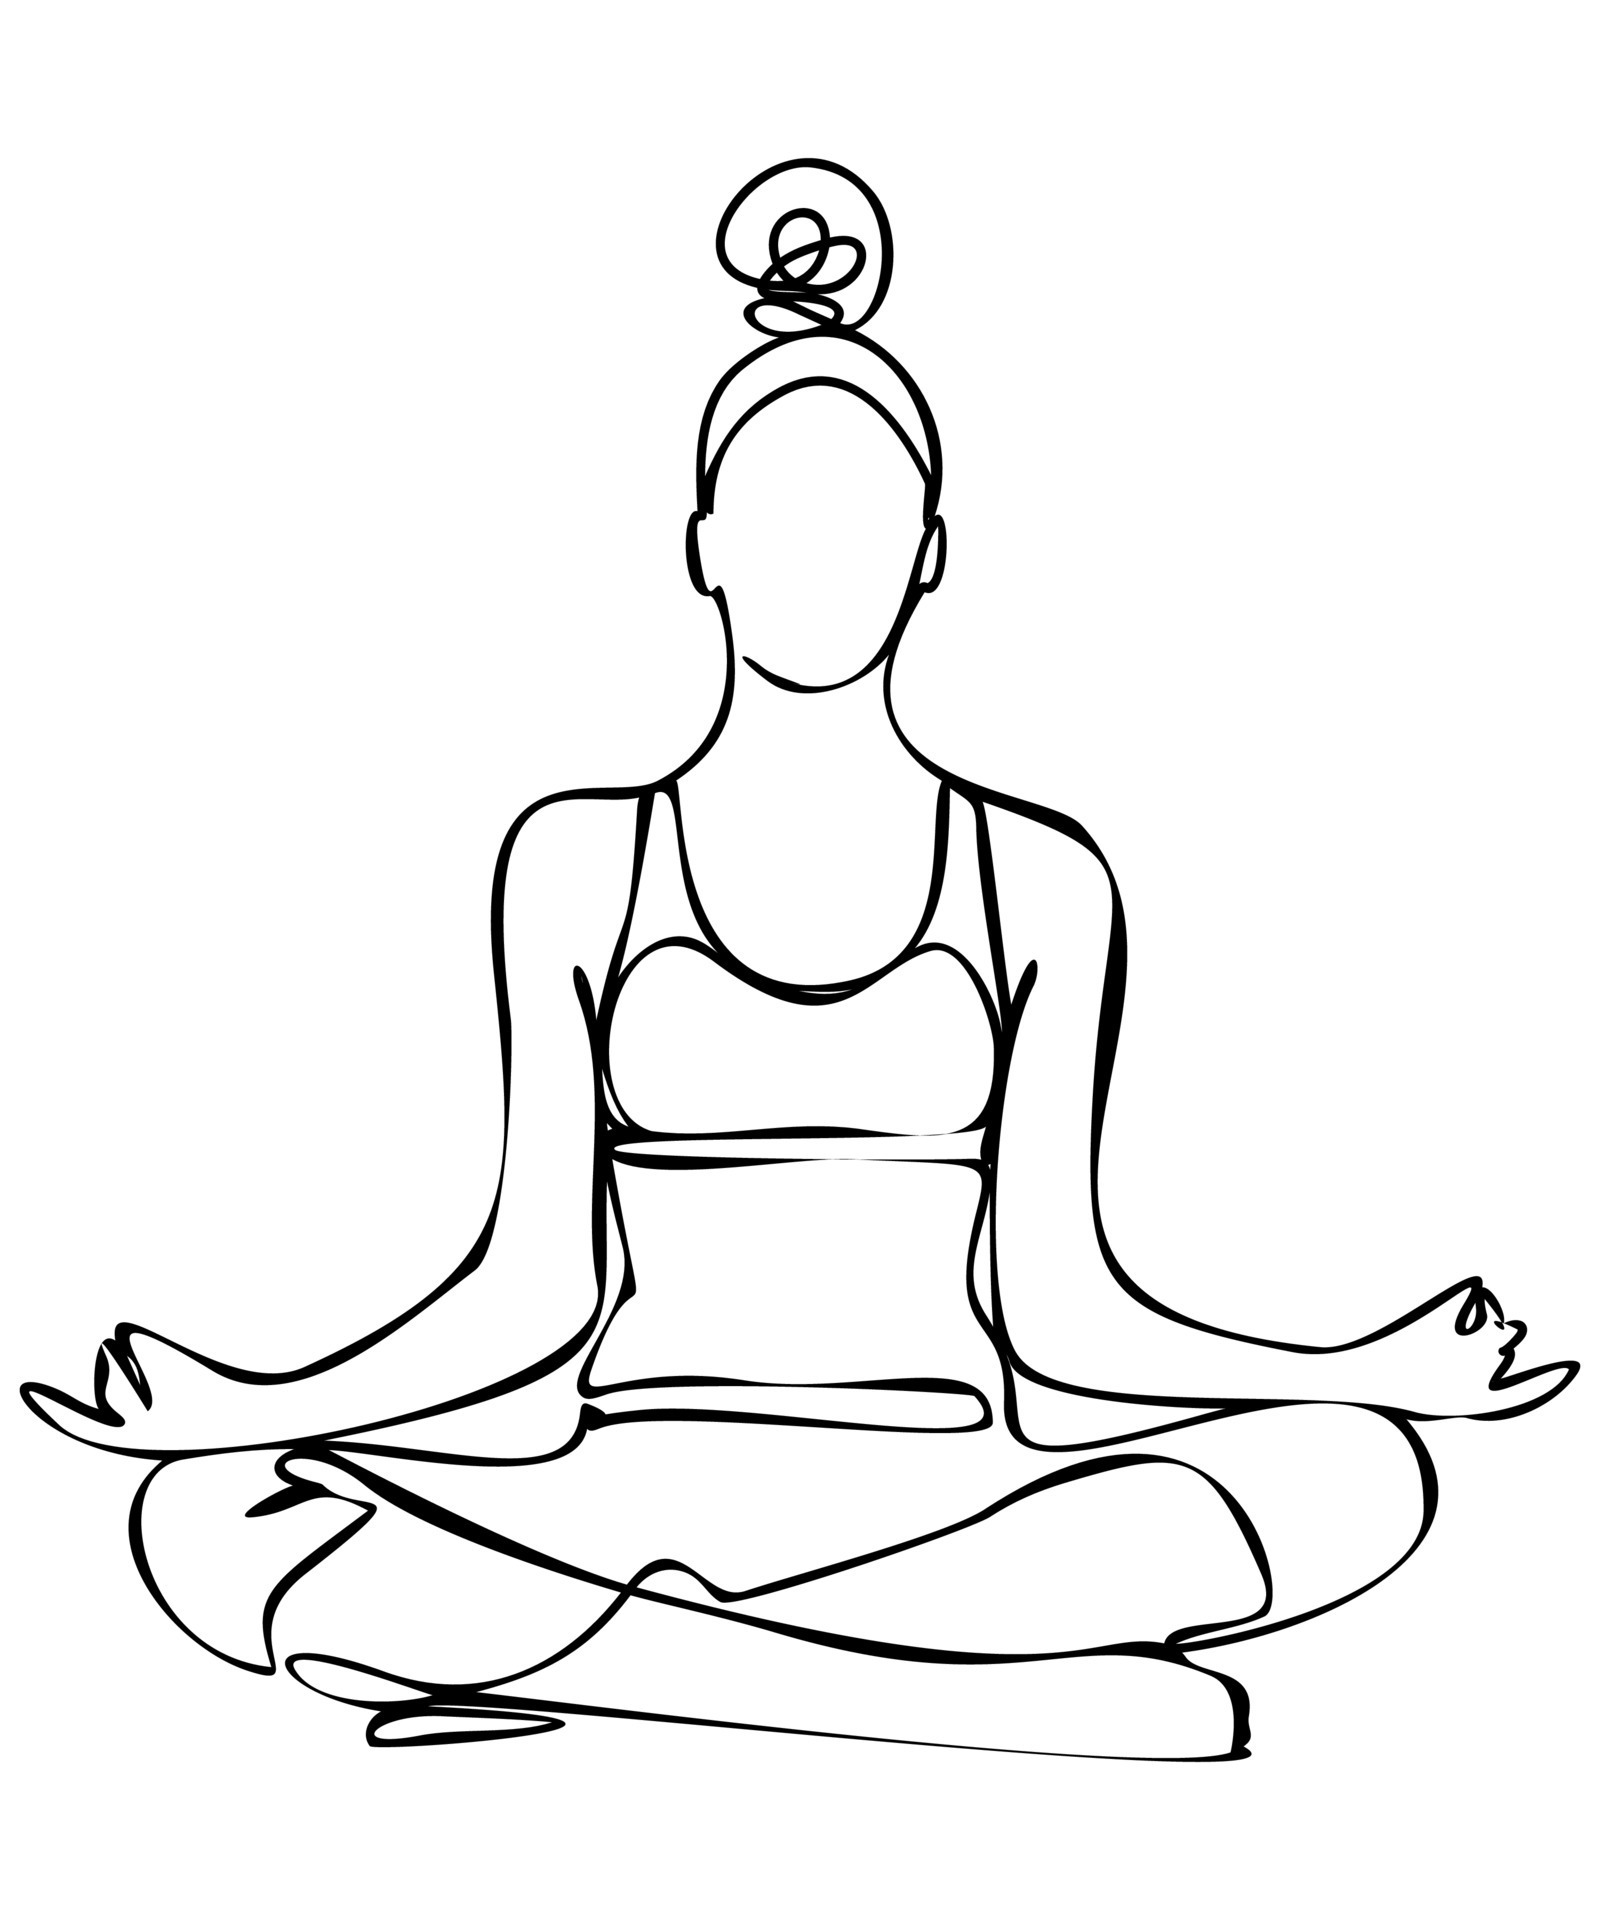 Free International Yoga Day Drawing Vector - Download in Illustrator, PSD,  EPS, SVG, JPG, PNG, Sketch | Template.net